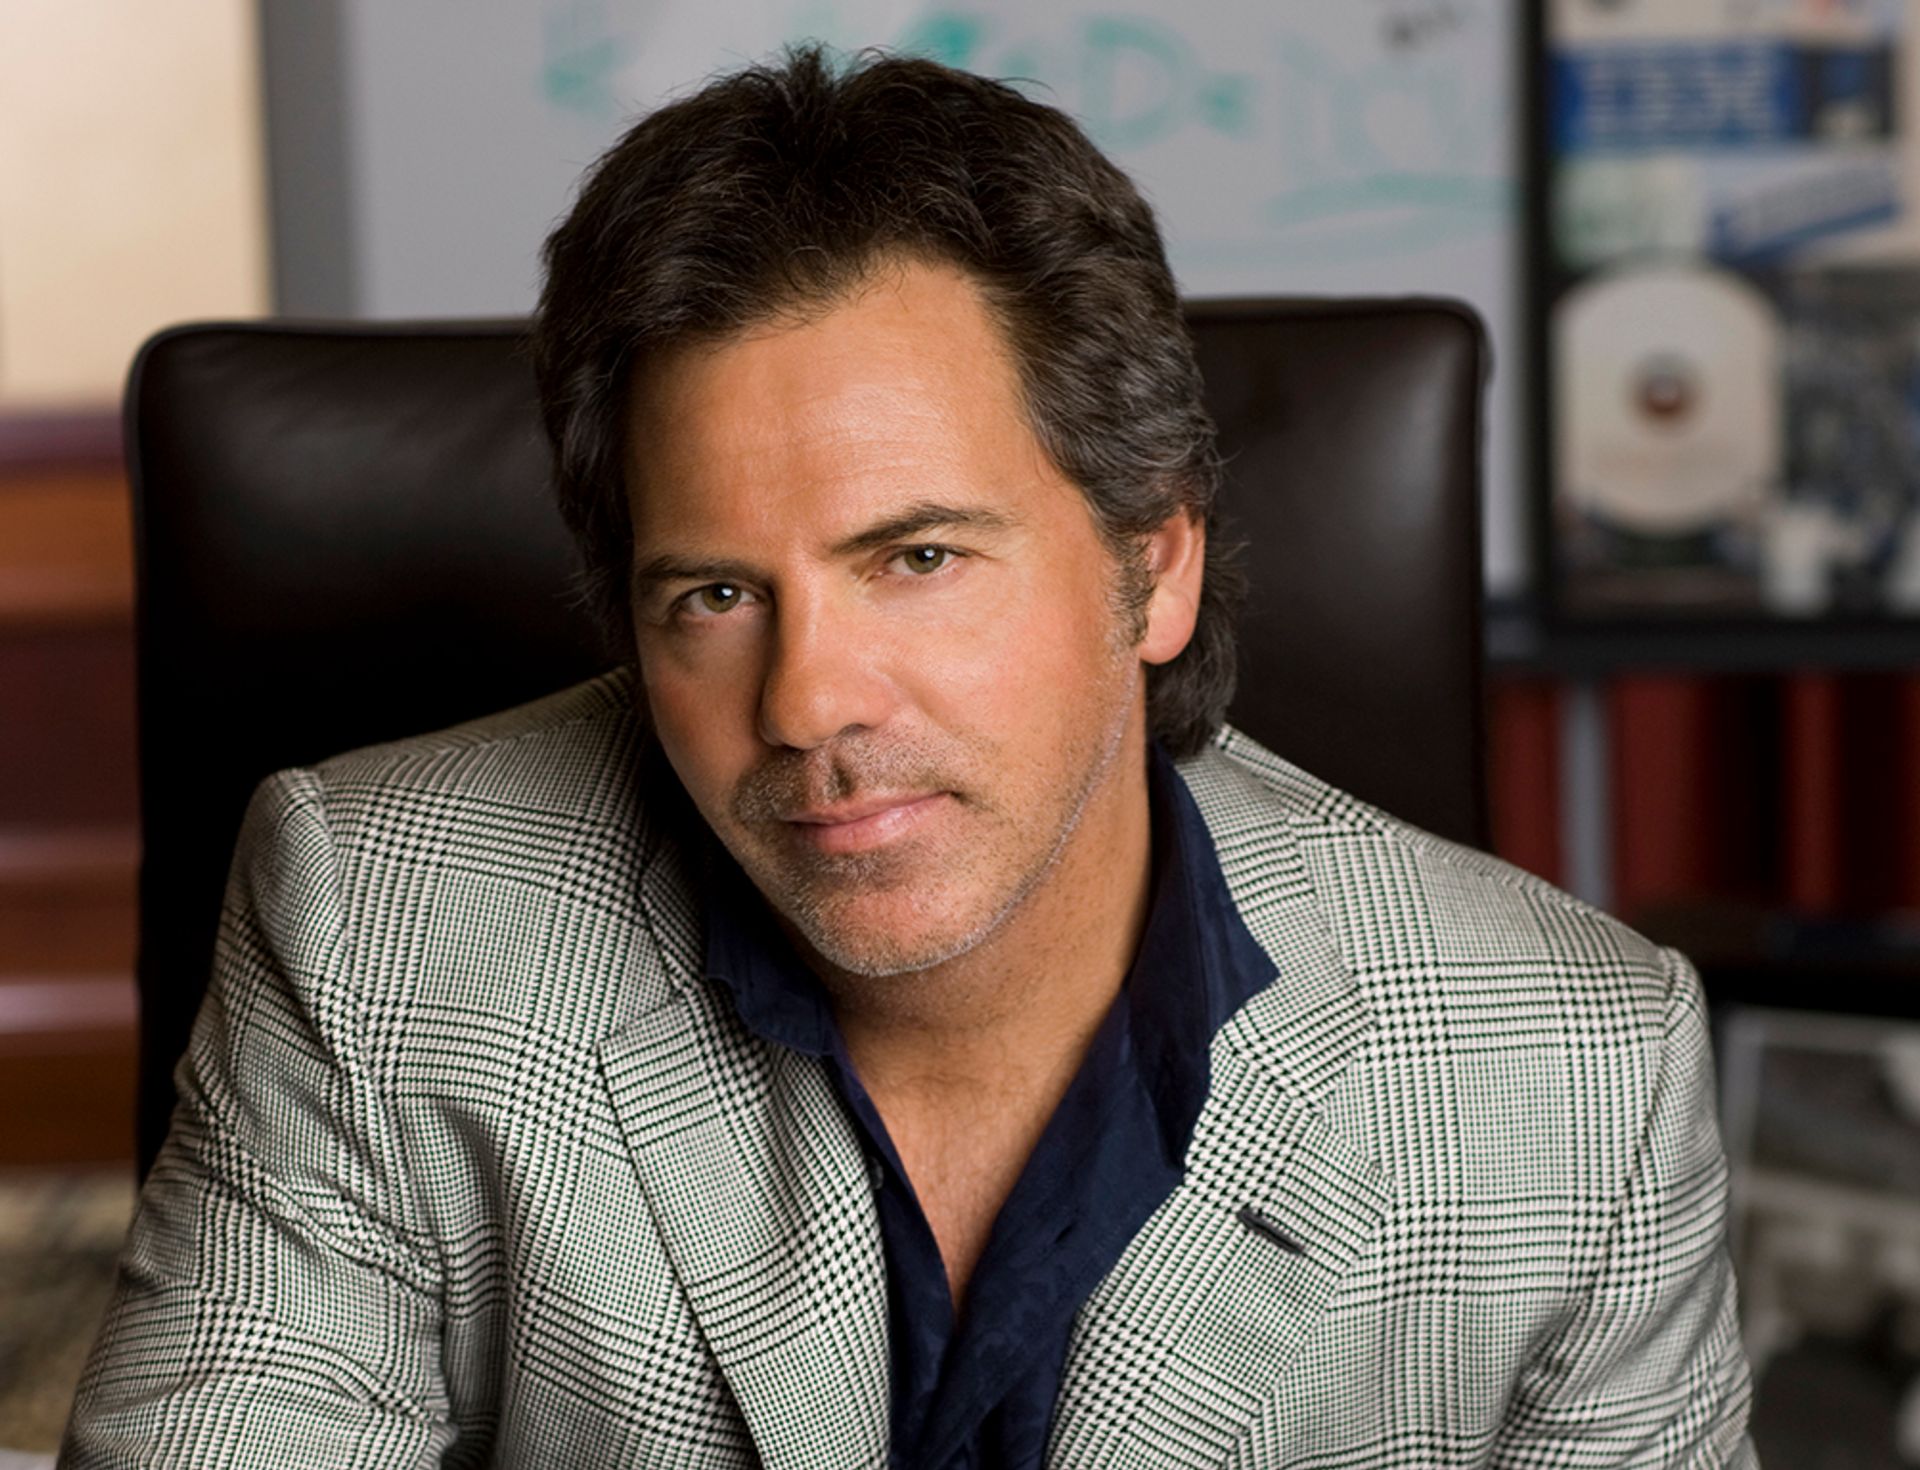 Tom Gores, the founder of Platinum Equity and a trustee at the Los Angeles County Museum of Art Diego Uchitel